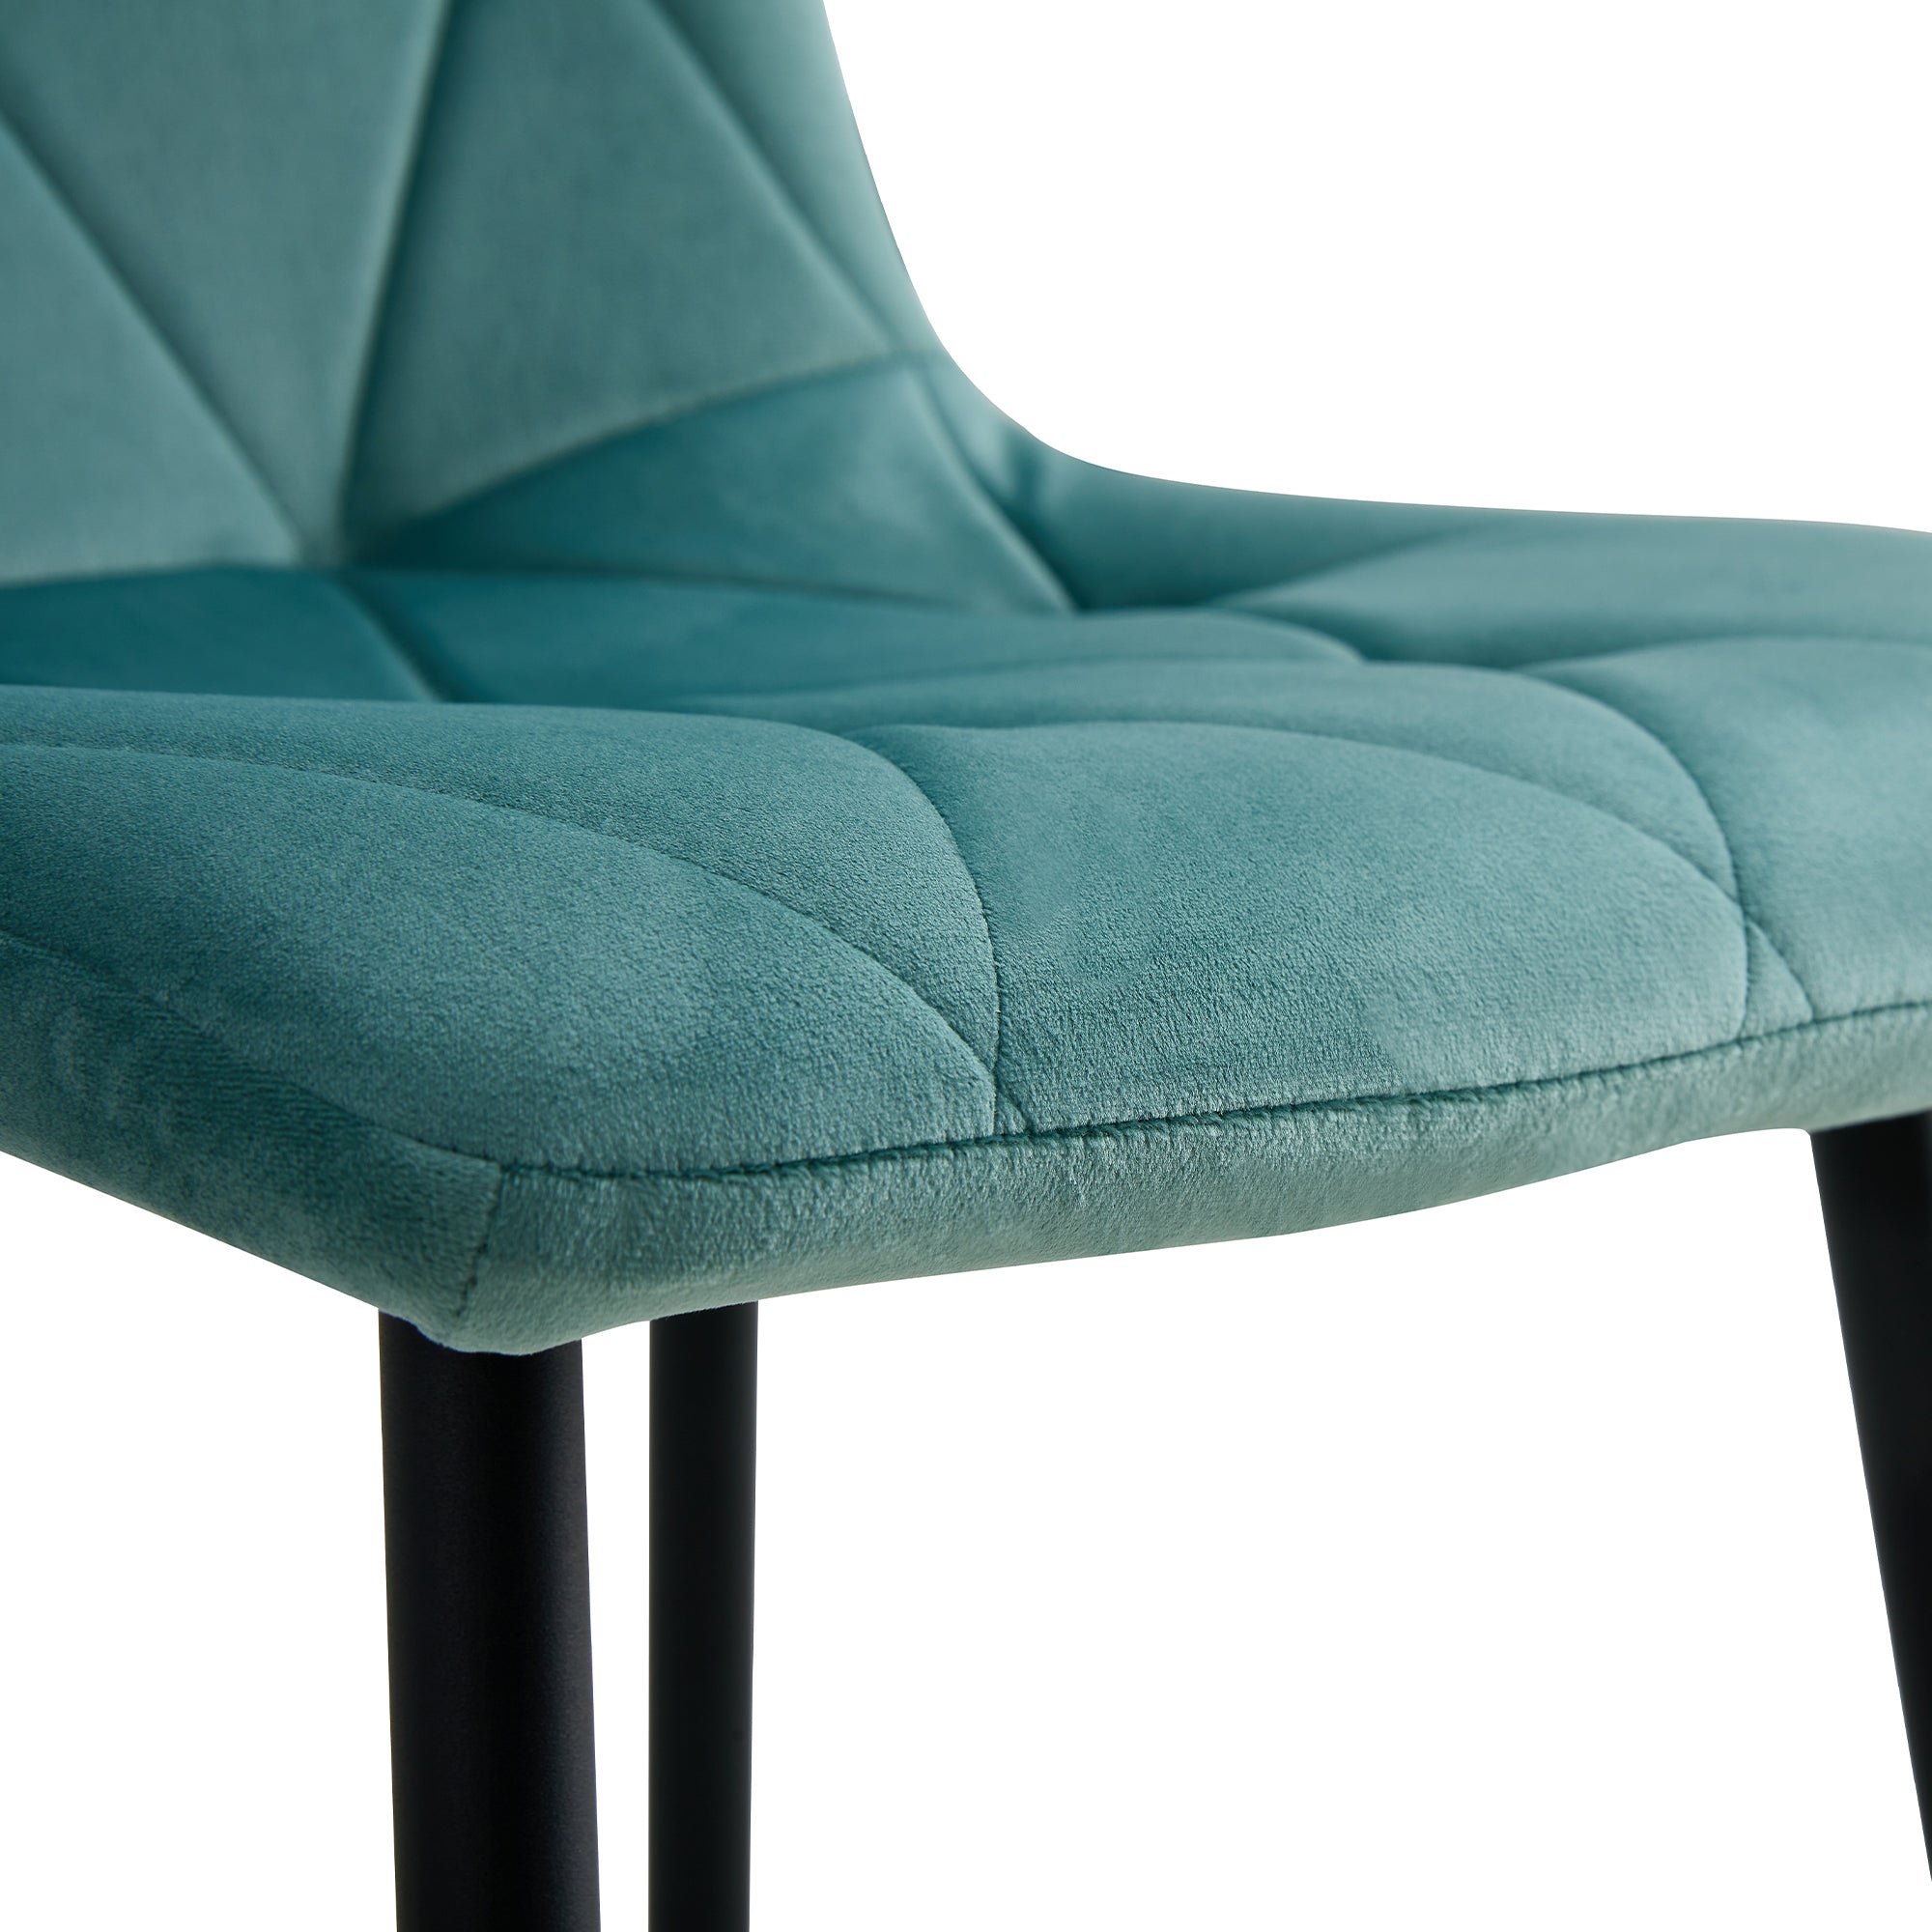 Modern Velvet Dining Chairs with Cushion Seat Back Black Coated Legs (Set of 4) - Antique Blue Green